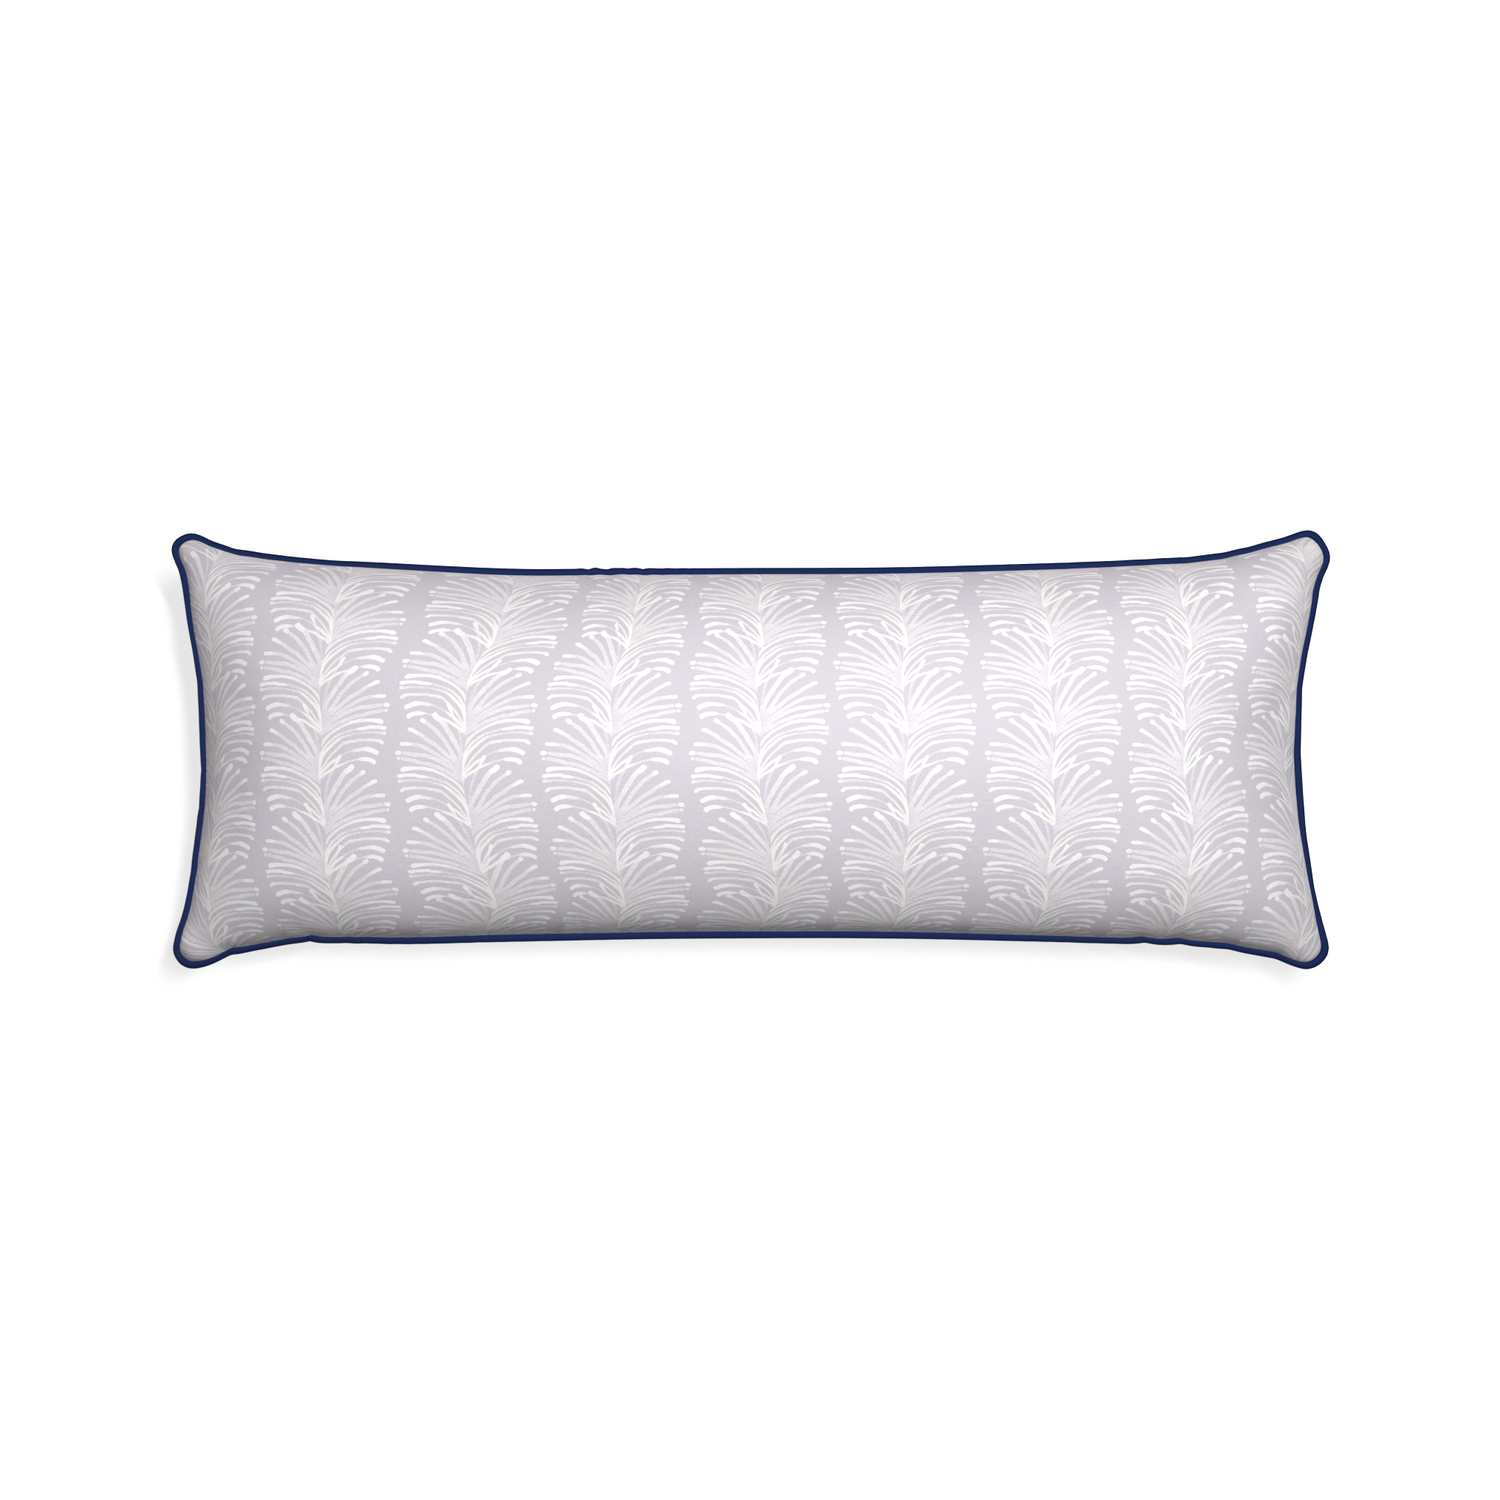 Xl-lumbar emma lavender custom lavender botanical stripepillow with midnight piping on white background